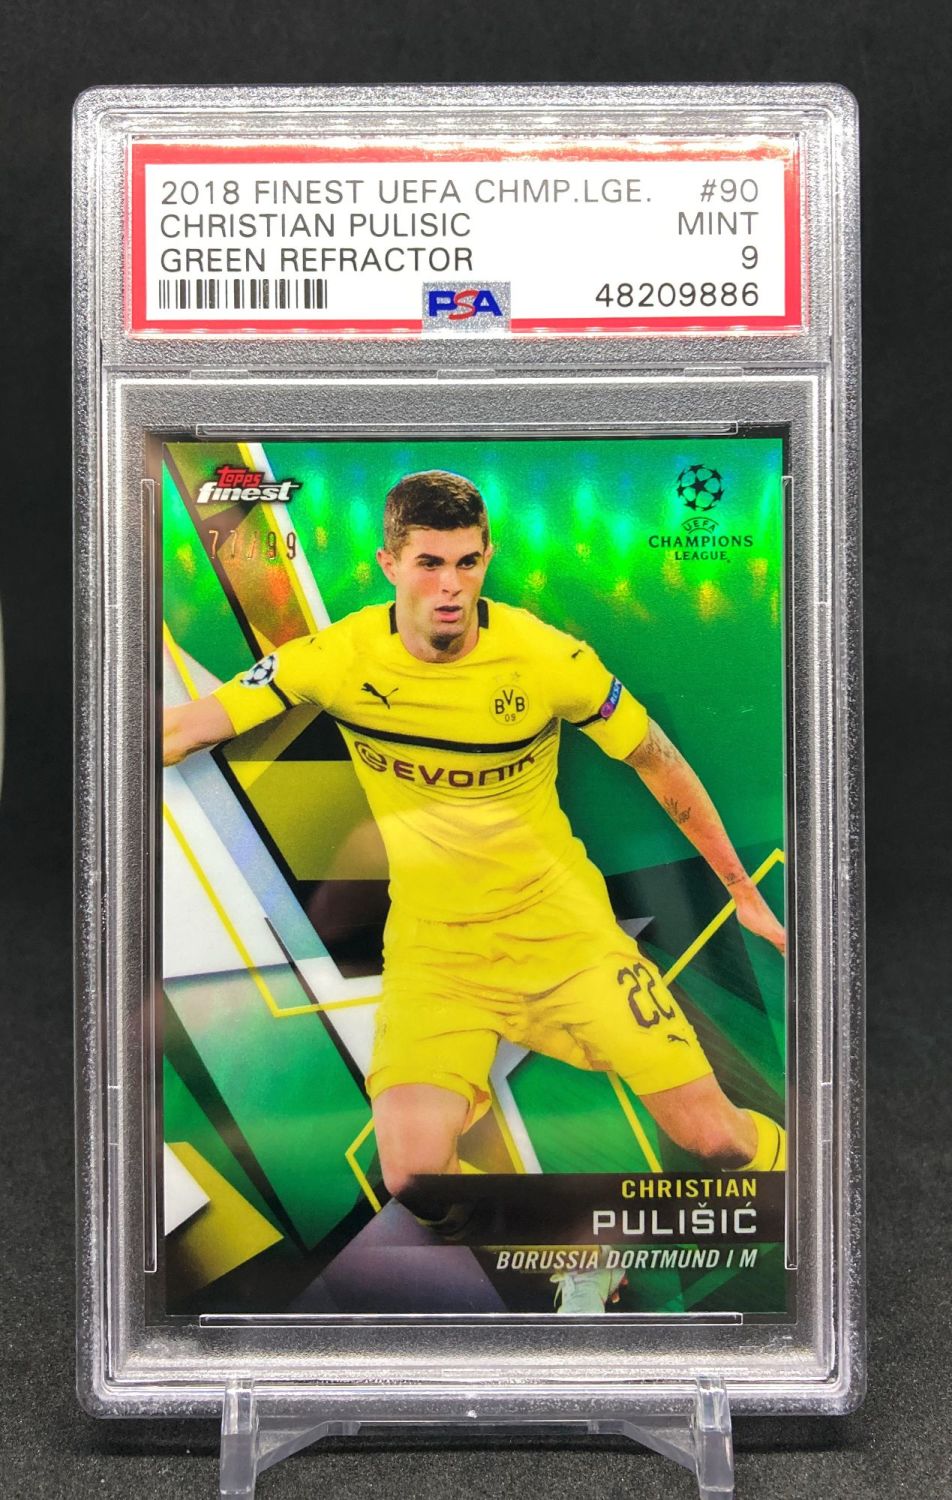 2018-19 Topps Finest Champions League CHRISTIAN PULISIC Green Refractor /99